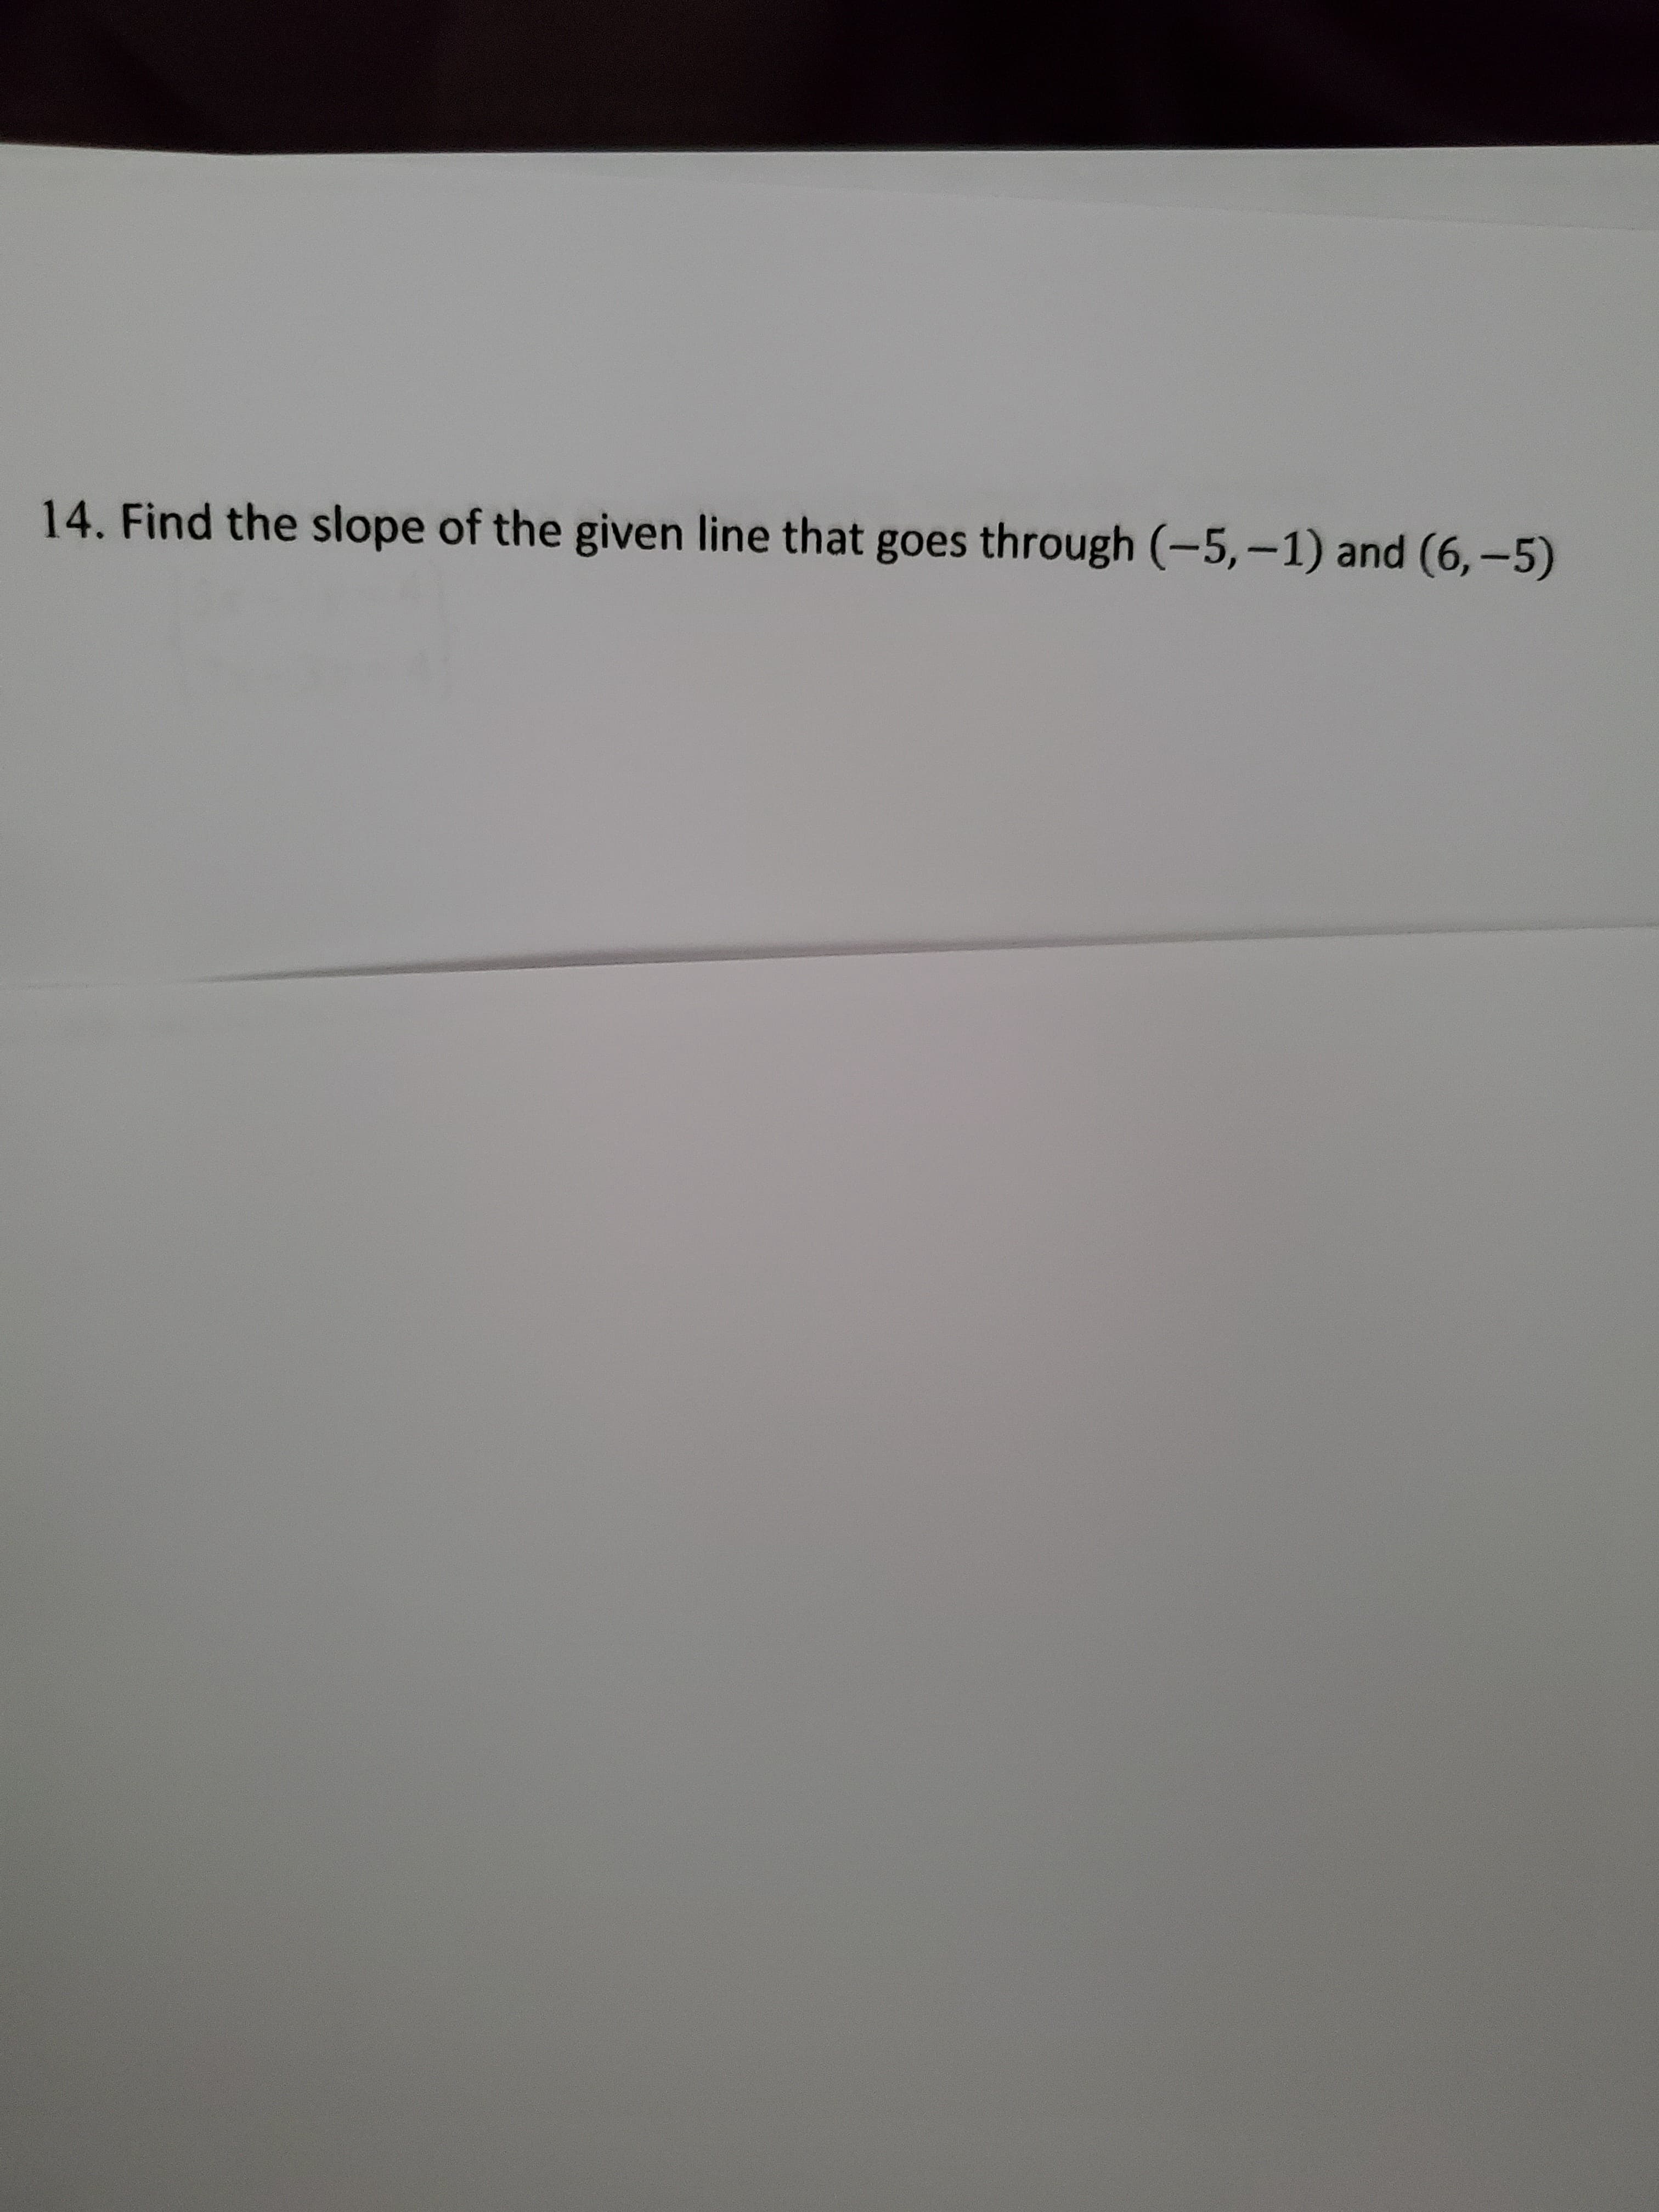 14. Find the slope of the given line that goes through (-5,-1) and (6,-5)
